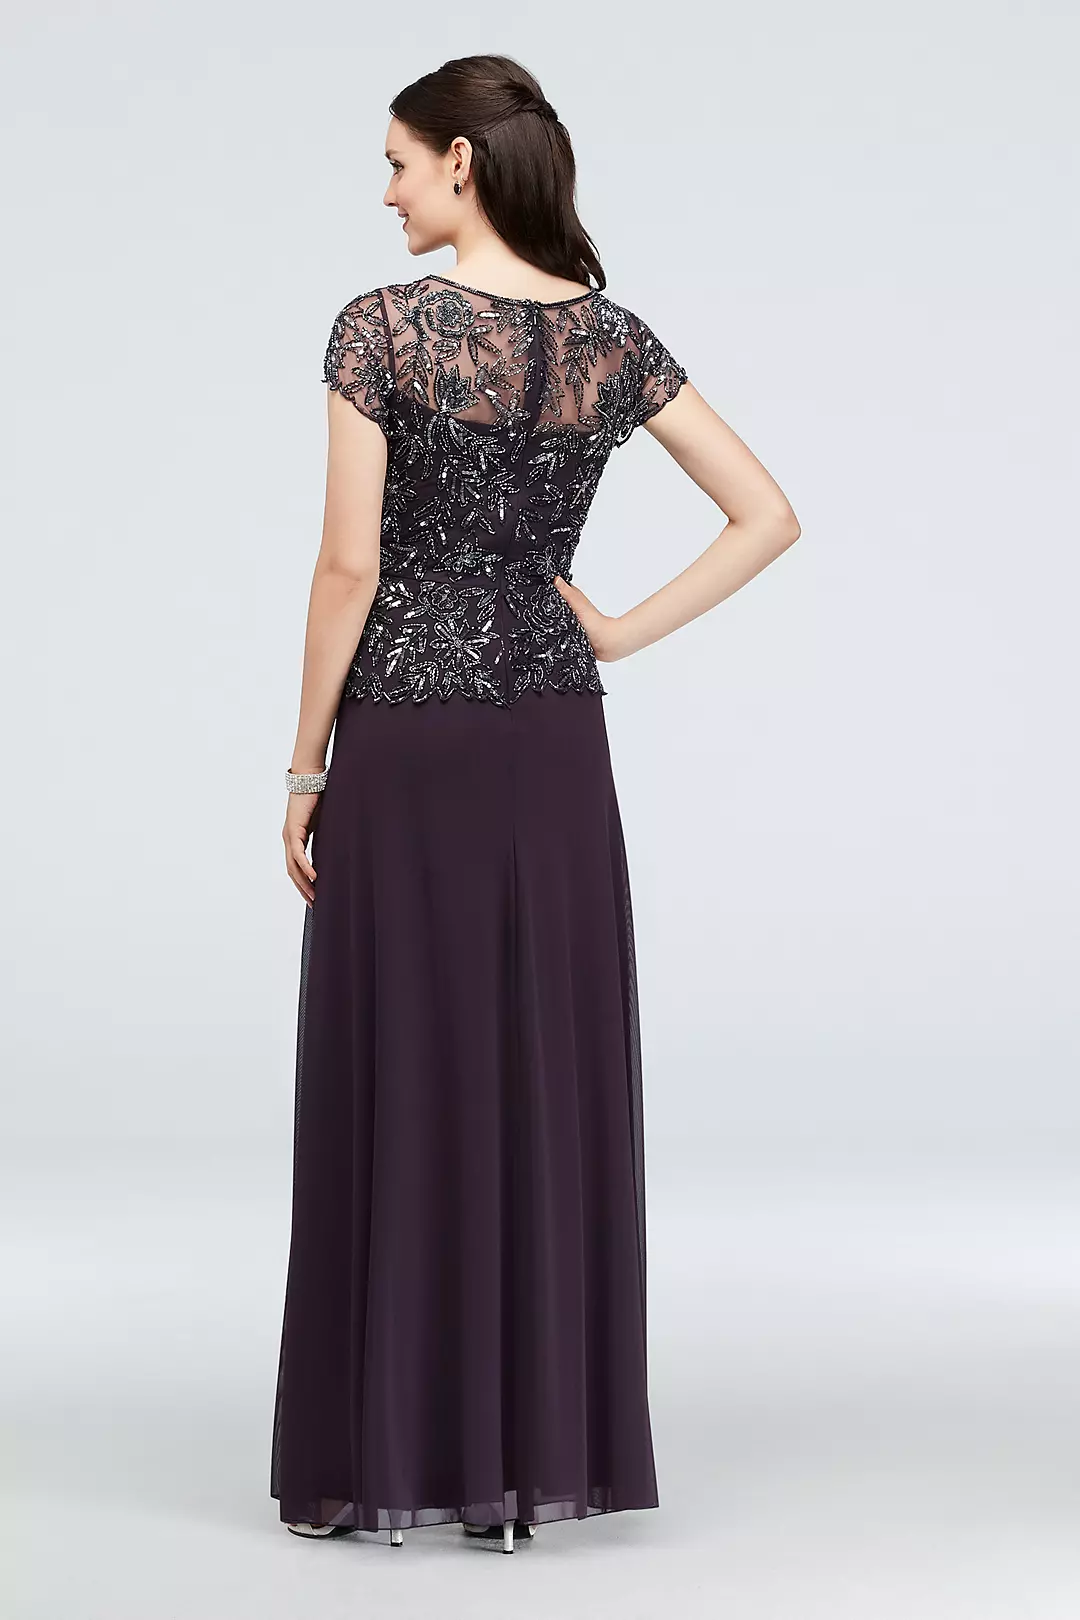 Floral Beaded Illusion Bodice Gown Image 2